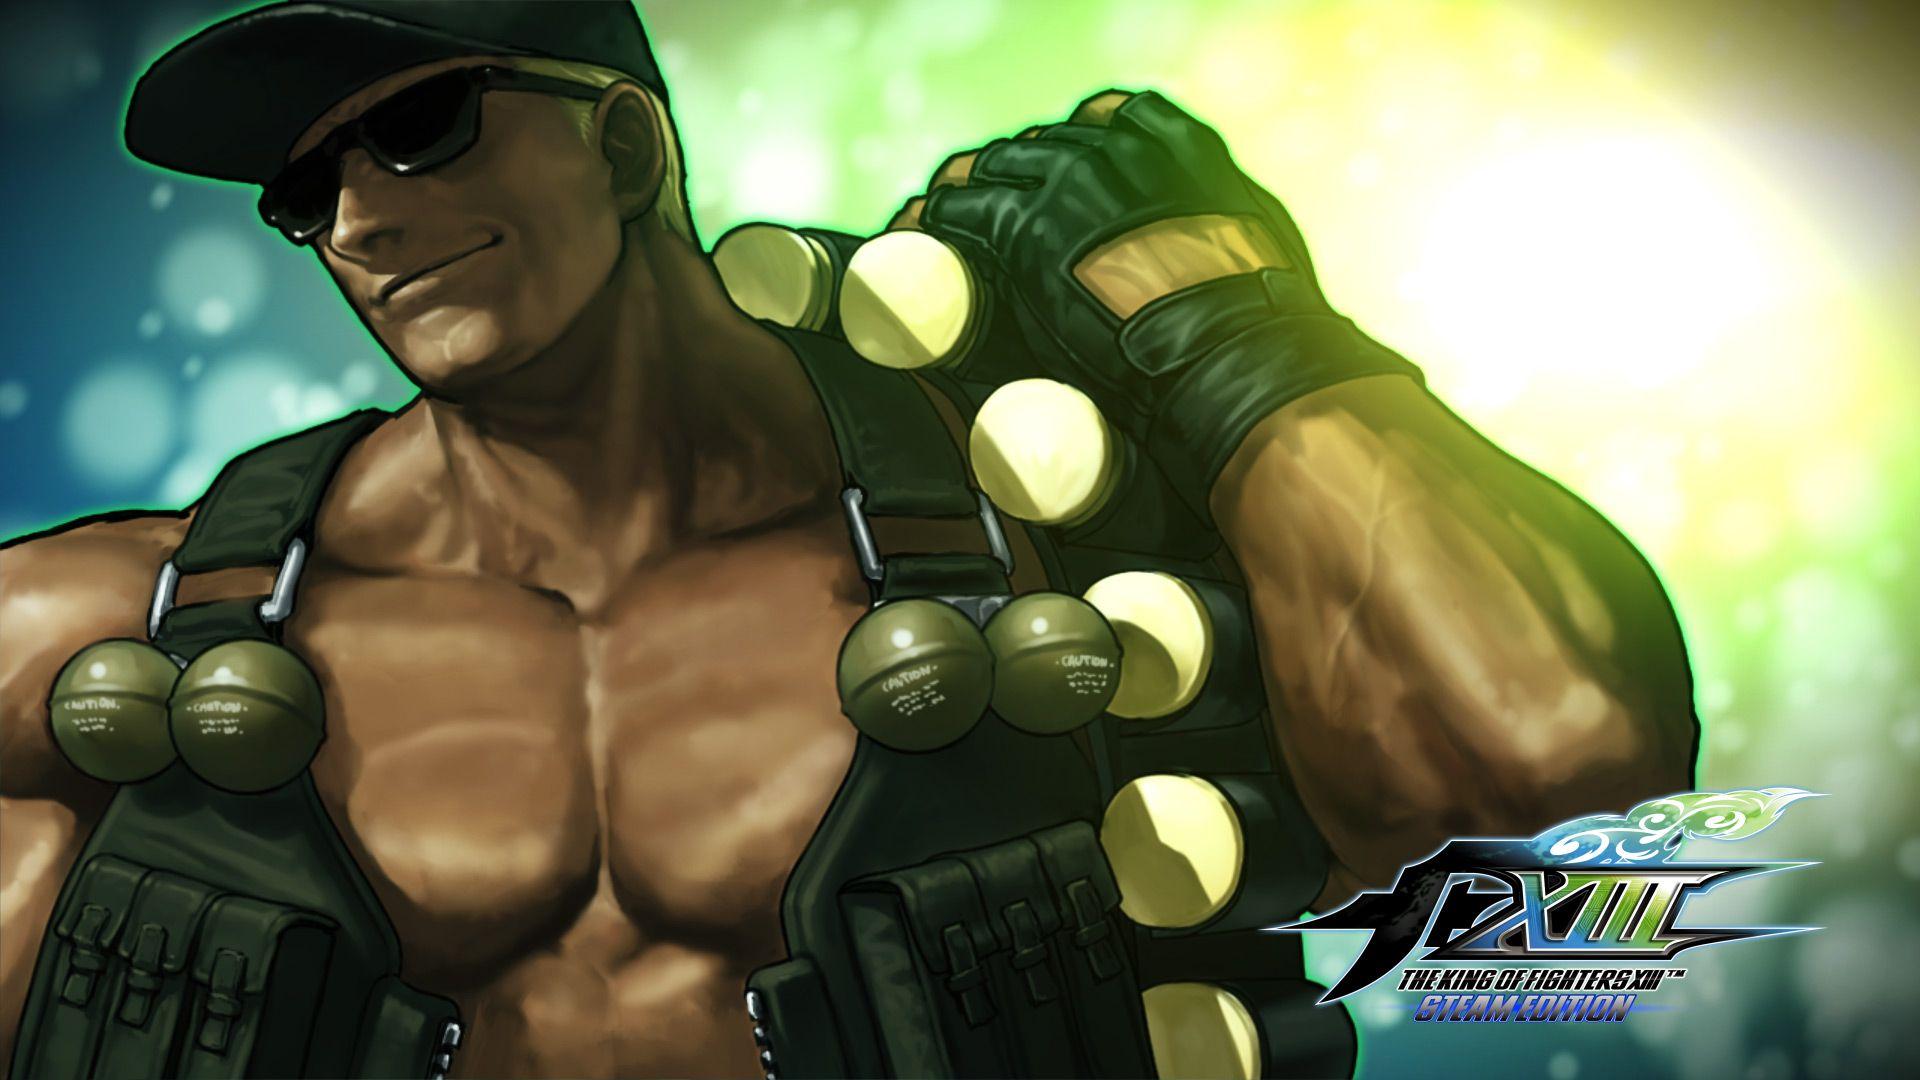 THE KING OF FIGHTERS XIII Artwork. Steam Trading